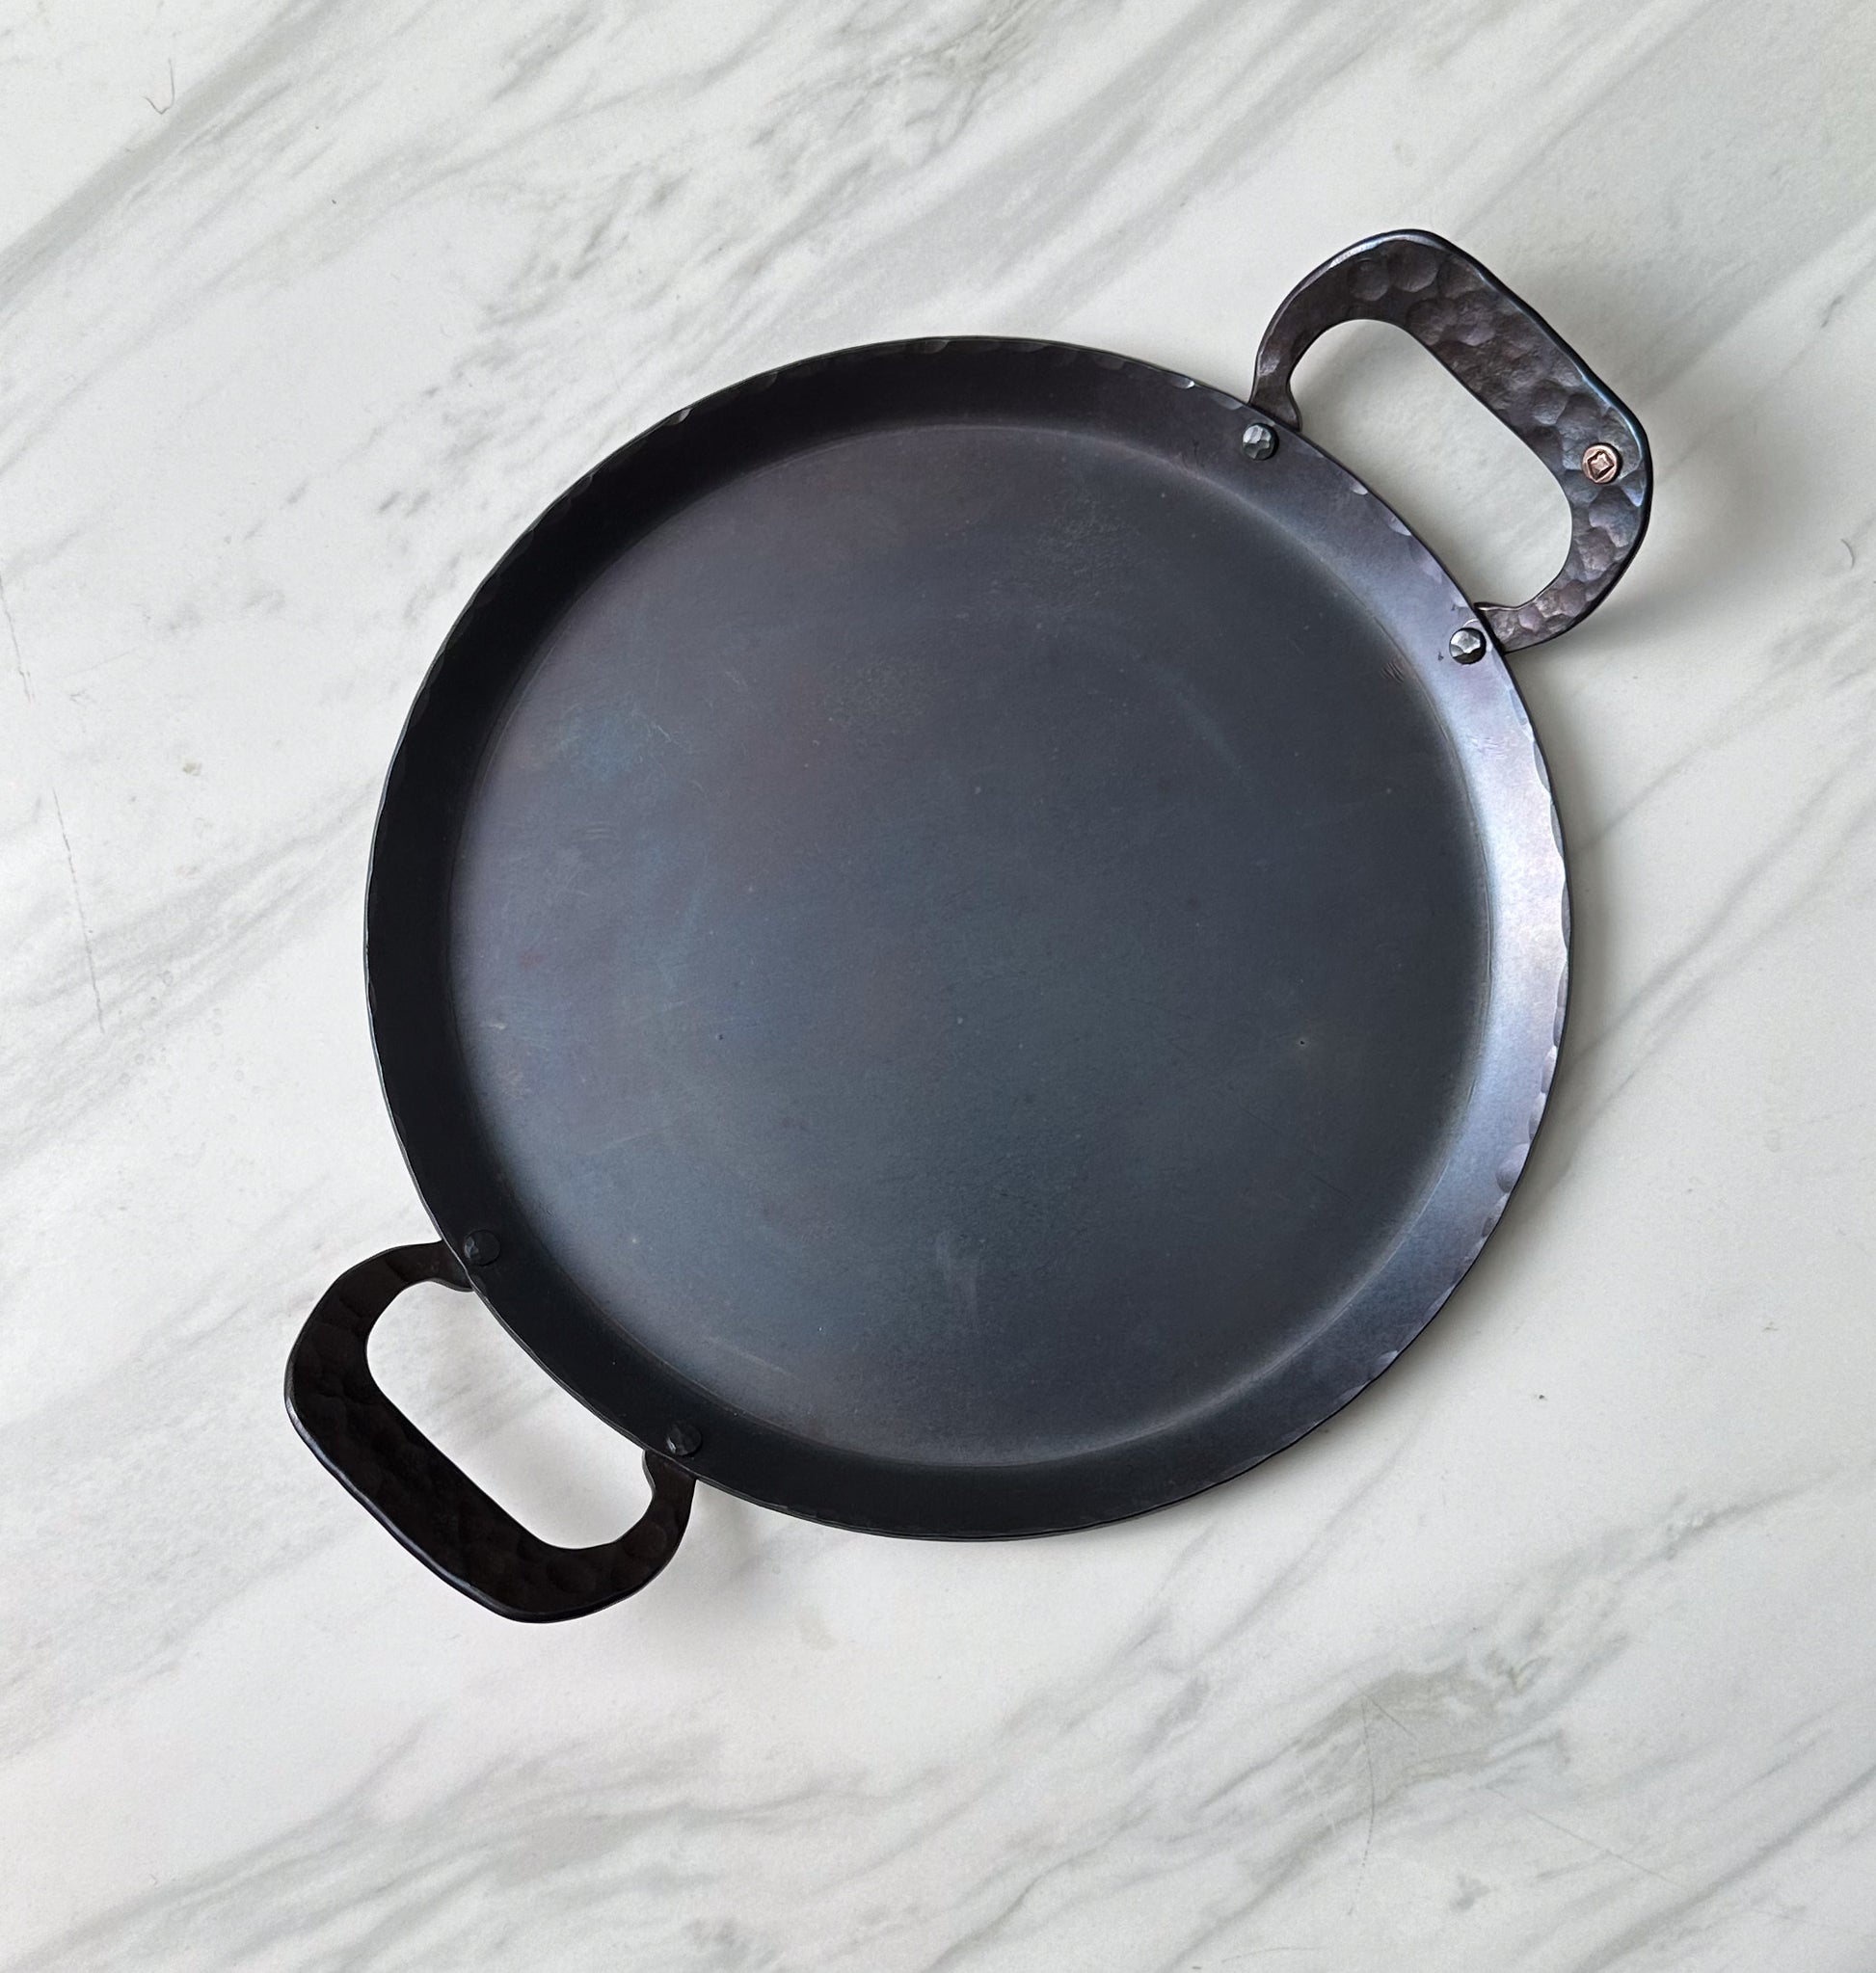 Highly Recommended Carbon Steel Pan For Under $45 